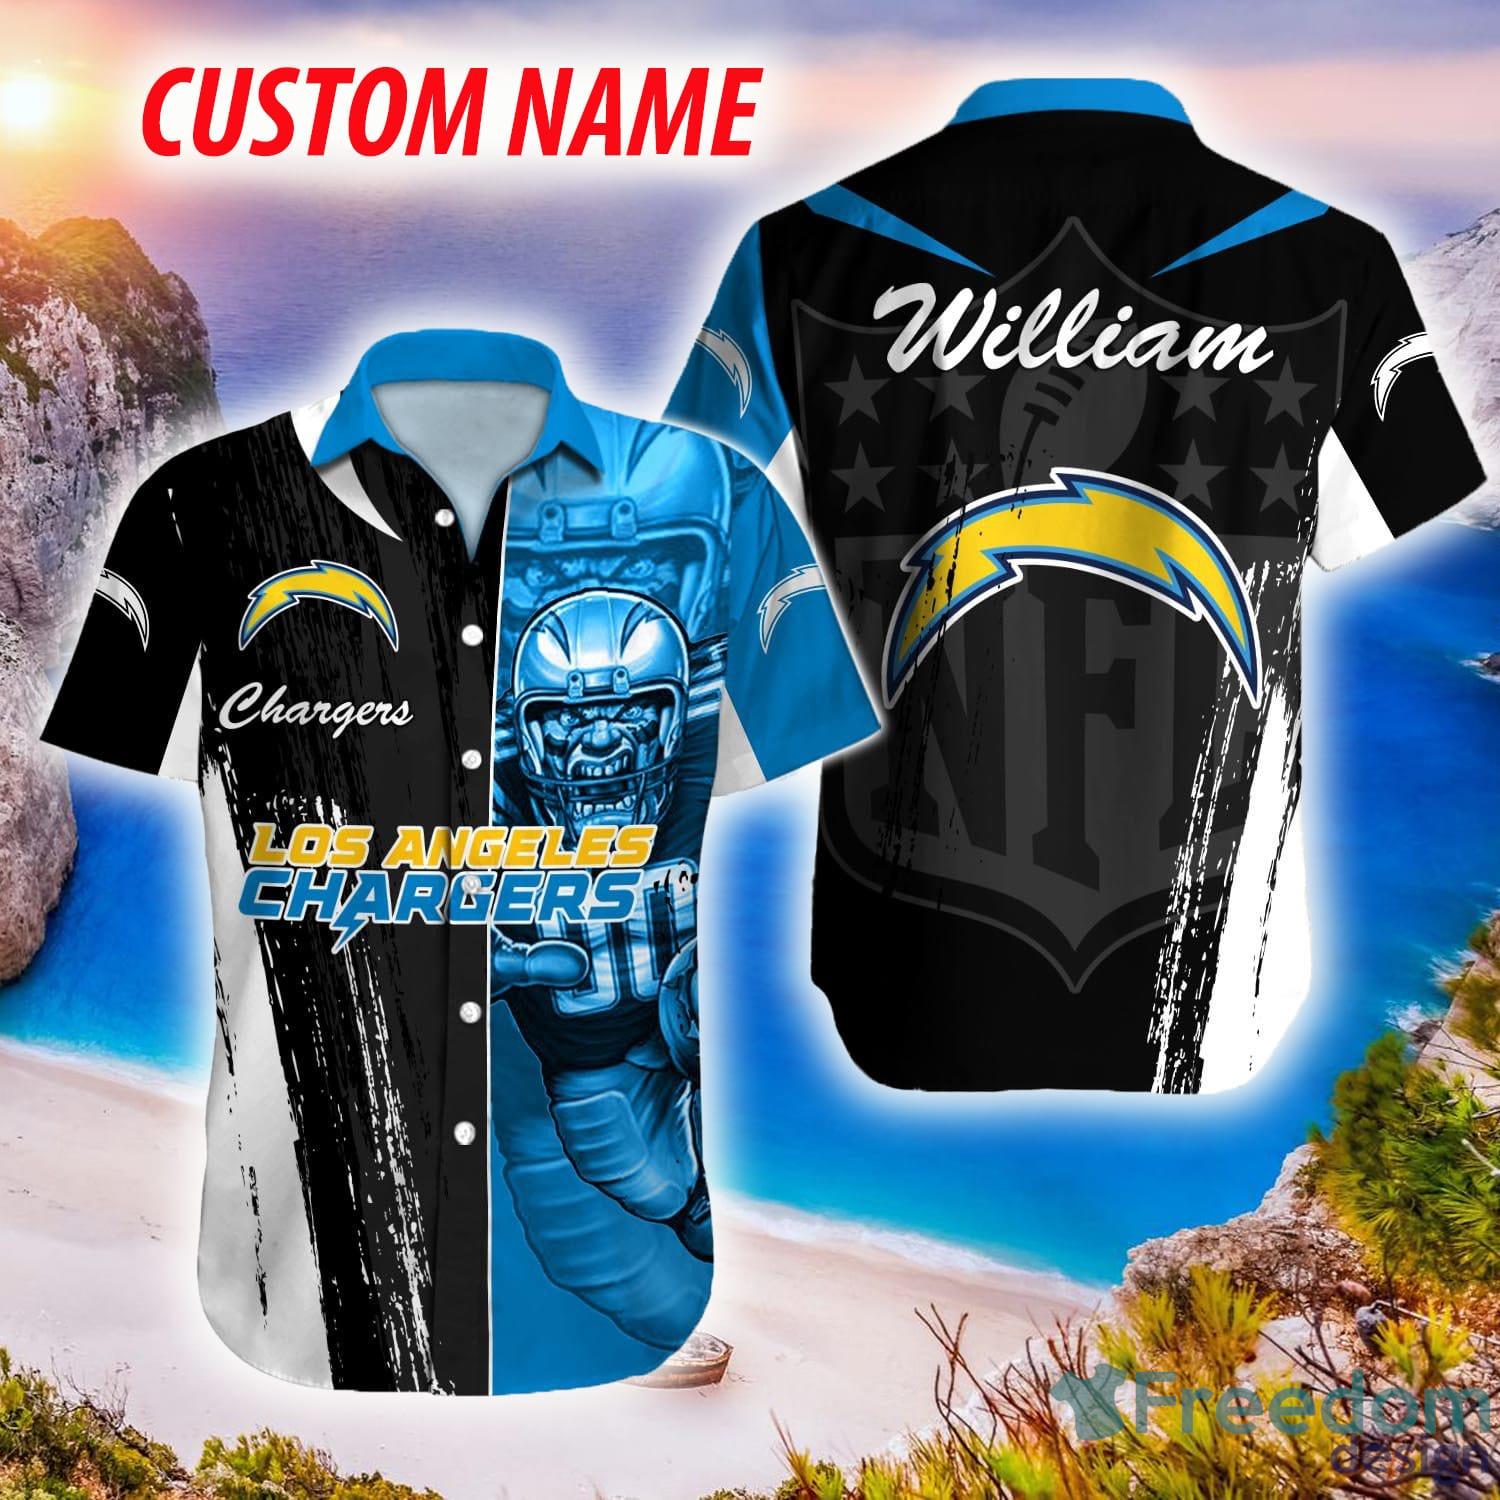 Los Angeles Chargers-NFL BASEBALL JERSEY CUSTOM NAME AND NUMBER Best Gift  For Men And Women Fans